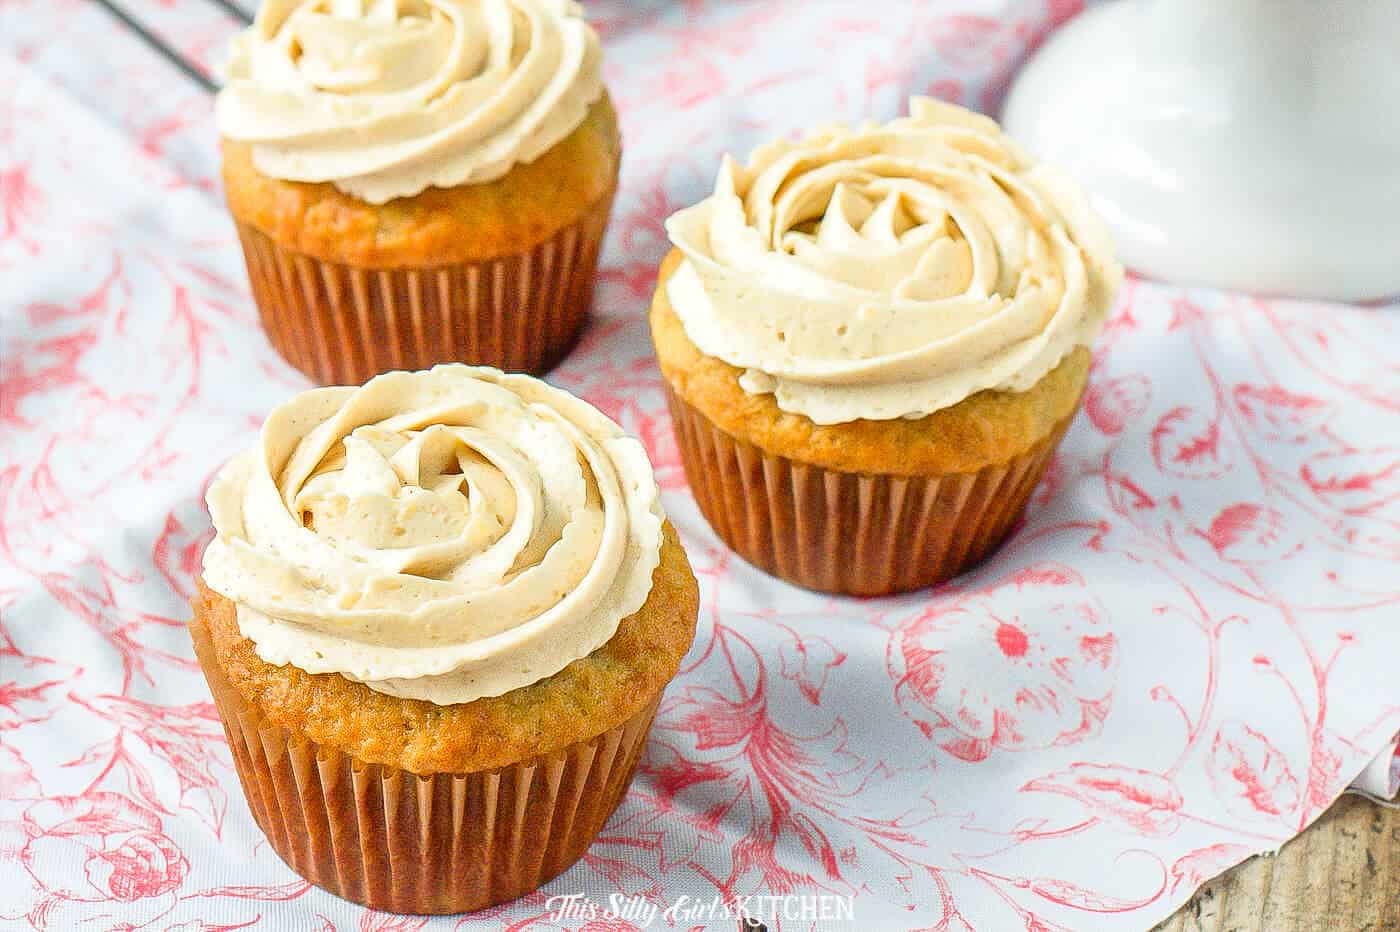 Banana Cupcakes, light, moist cupcakes topped with THE BEST brown sugar frosting. #recipe from thissillygirlskitchen.com #bananacupcakes #brownsugarfrosting #cupcakefrosting #cupcakes